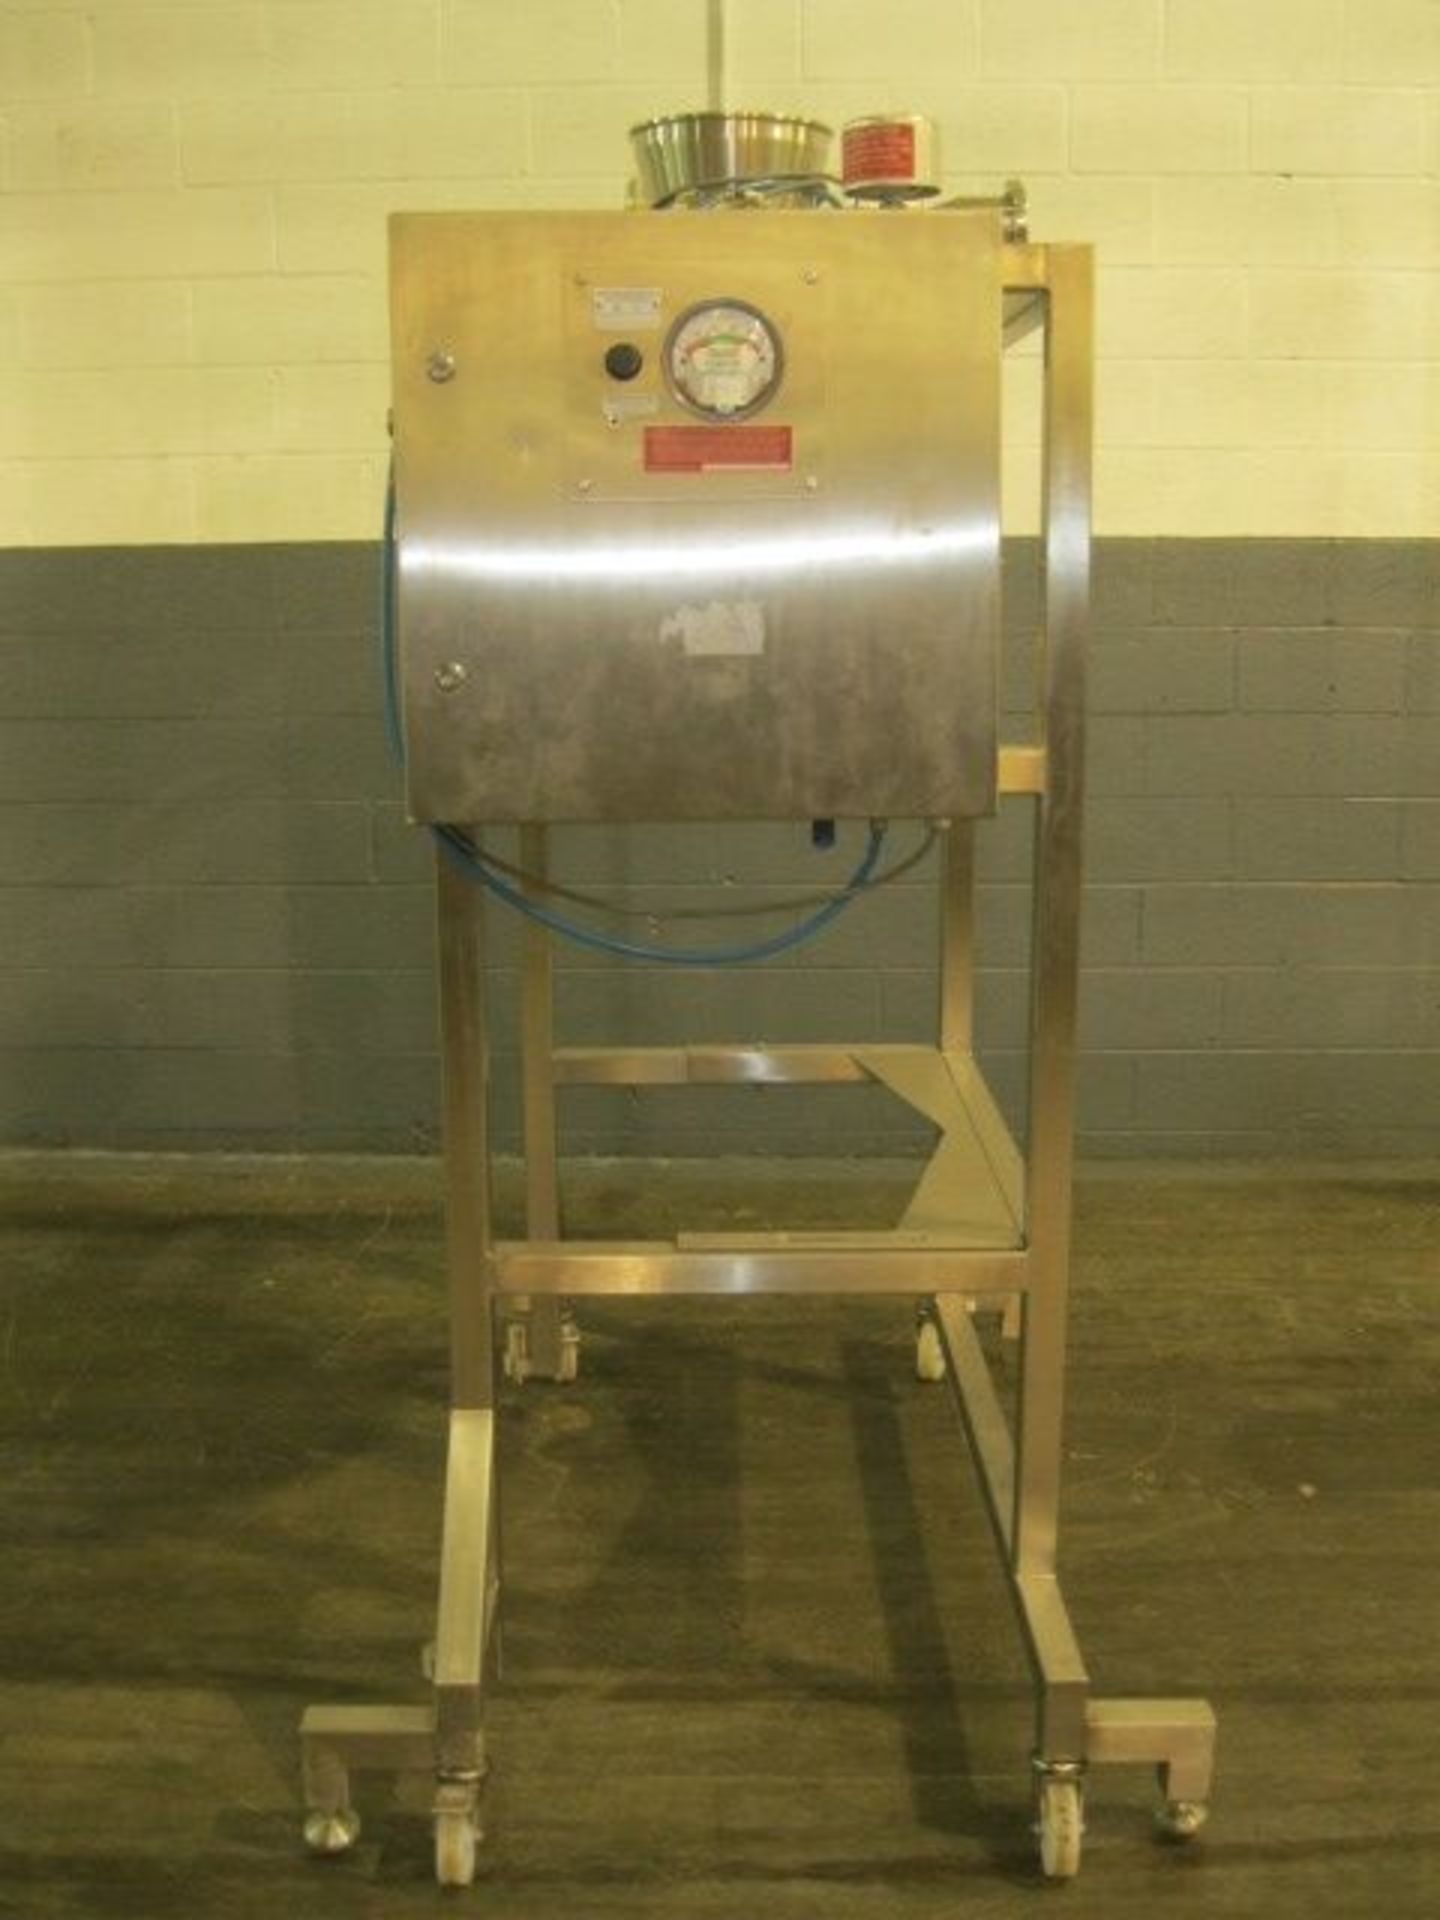 Extract Technology moble powder filling station - Stainless Steel Construction - Image 3 of 9